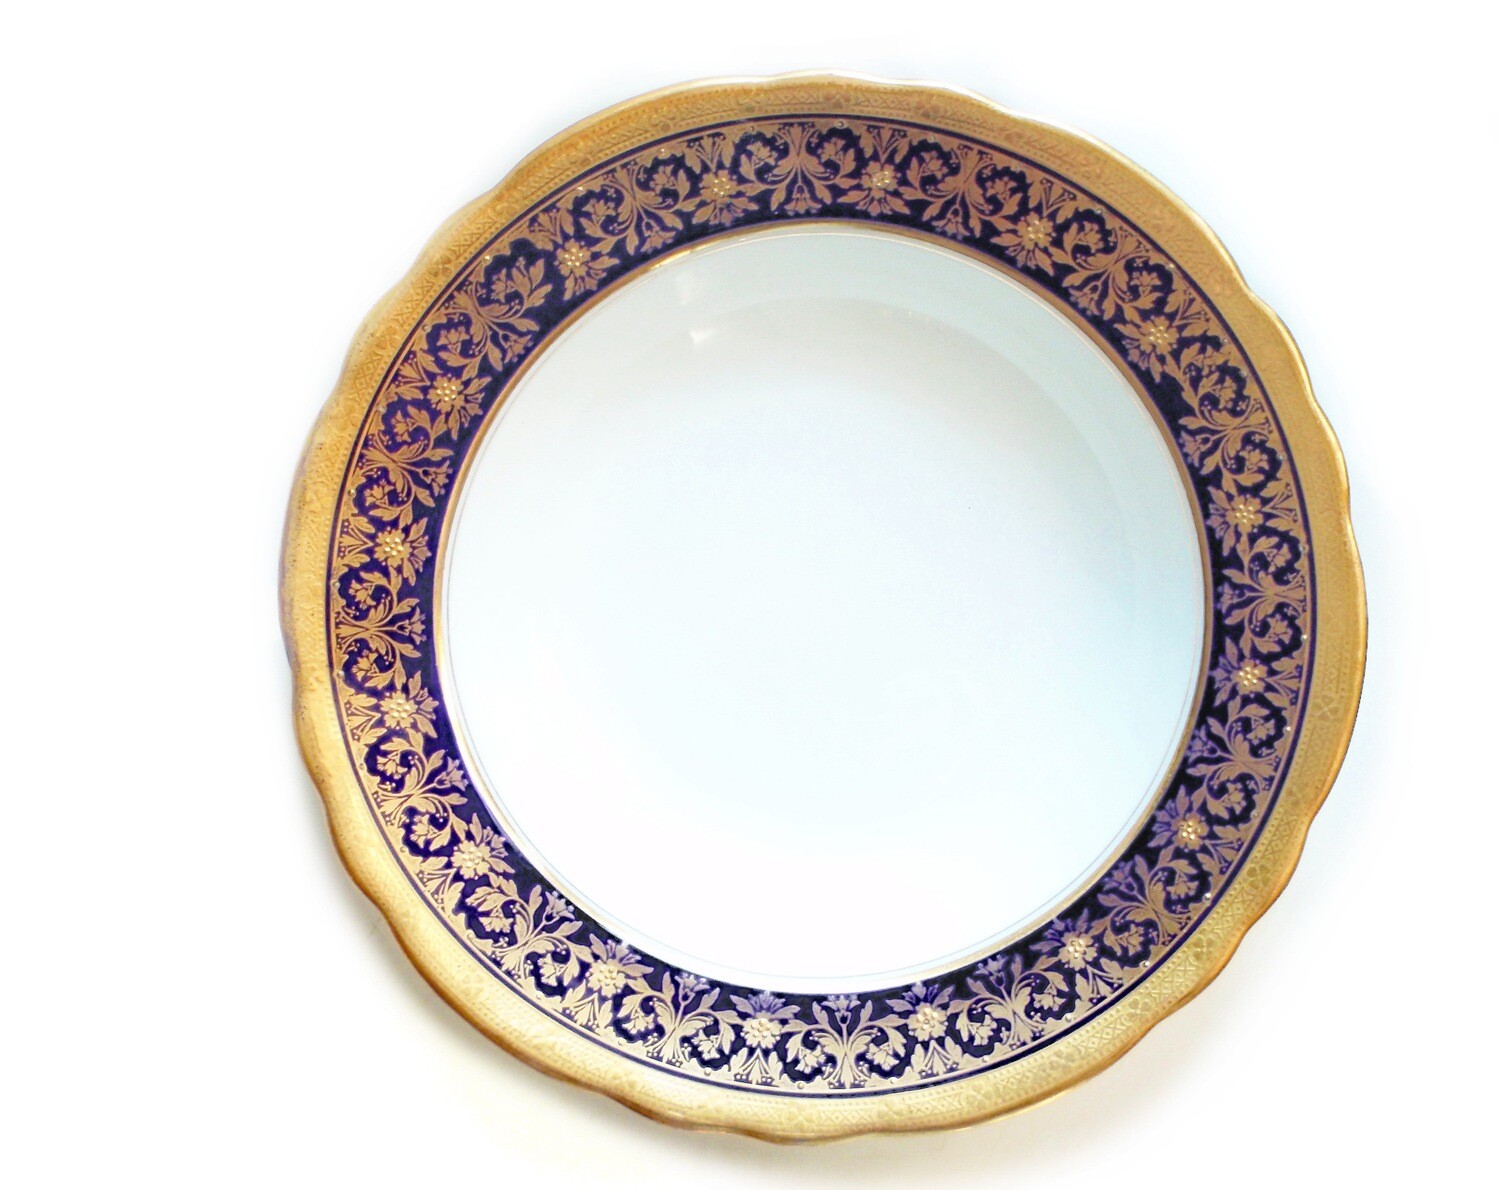 1 Aynsley Kenilworth Cobalt and Gold Soup Plates